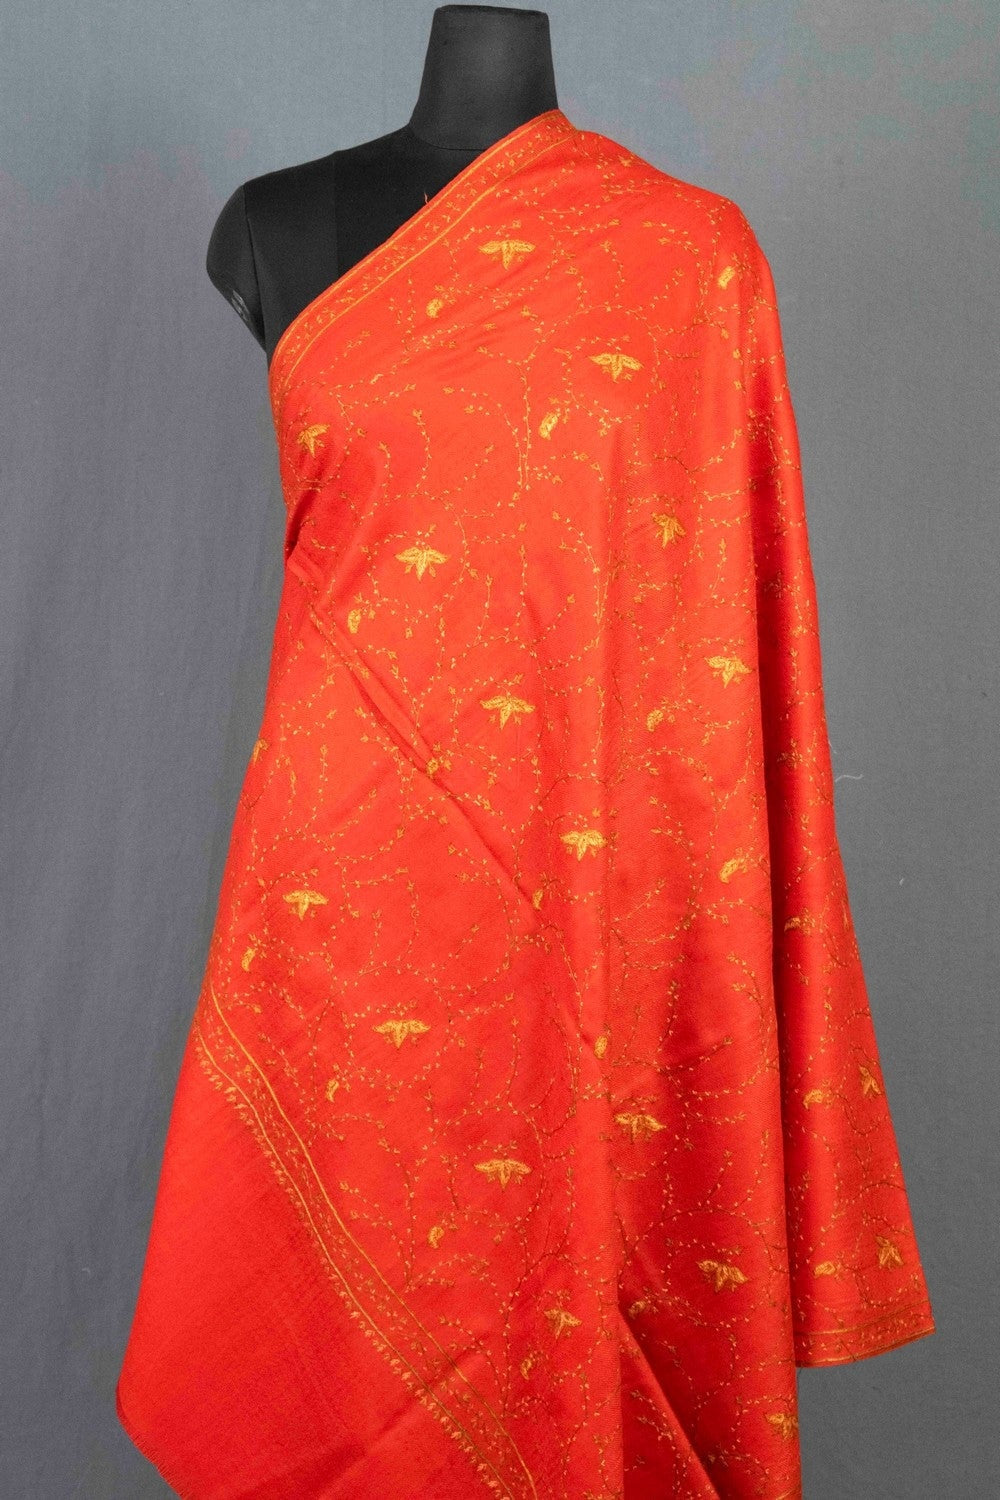 Hot Red Colour Sozni Shawl Emblished With Designer Over All